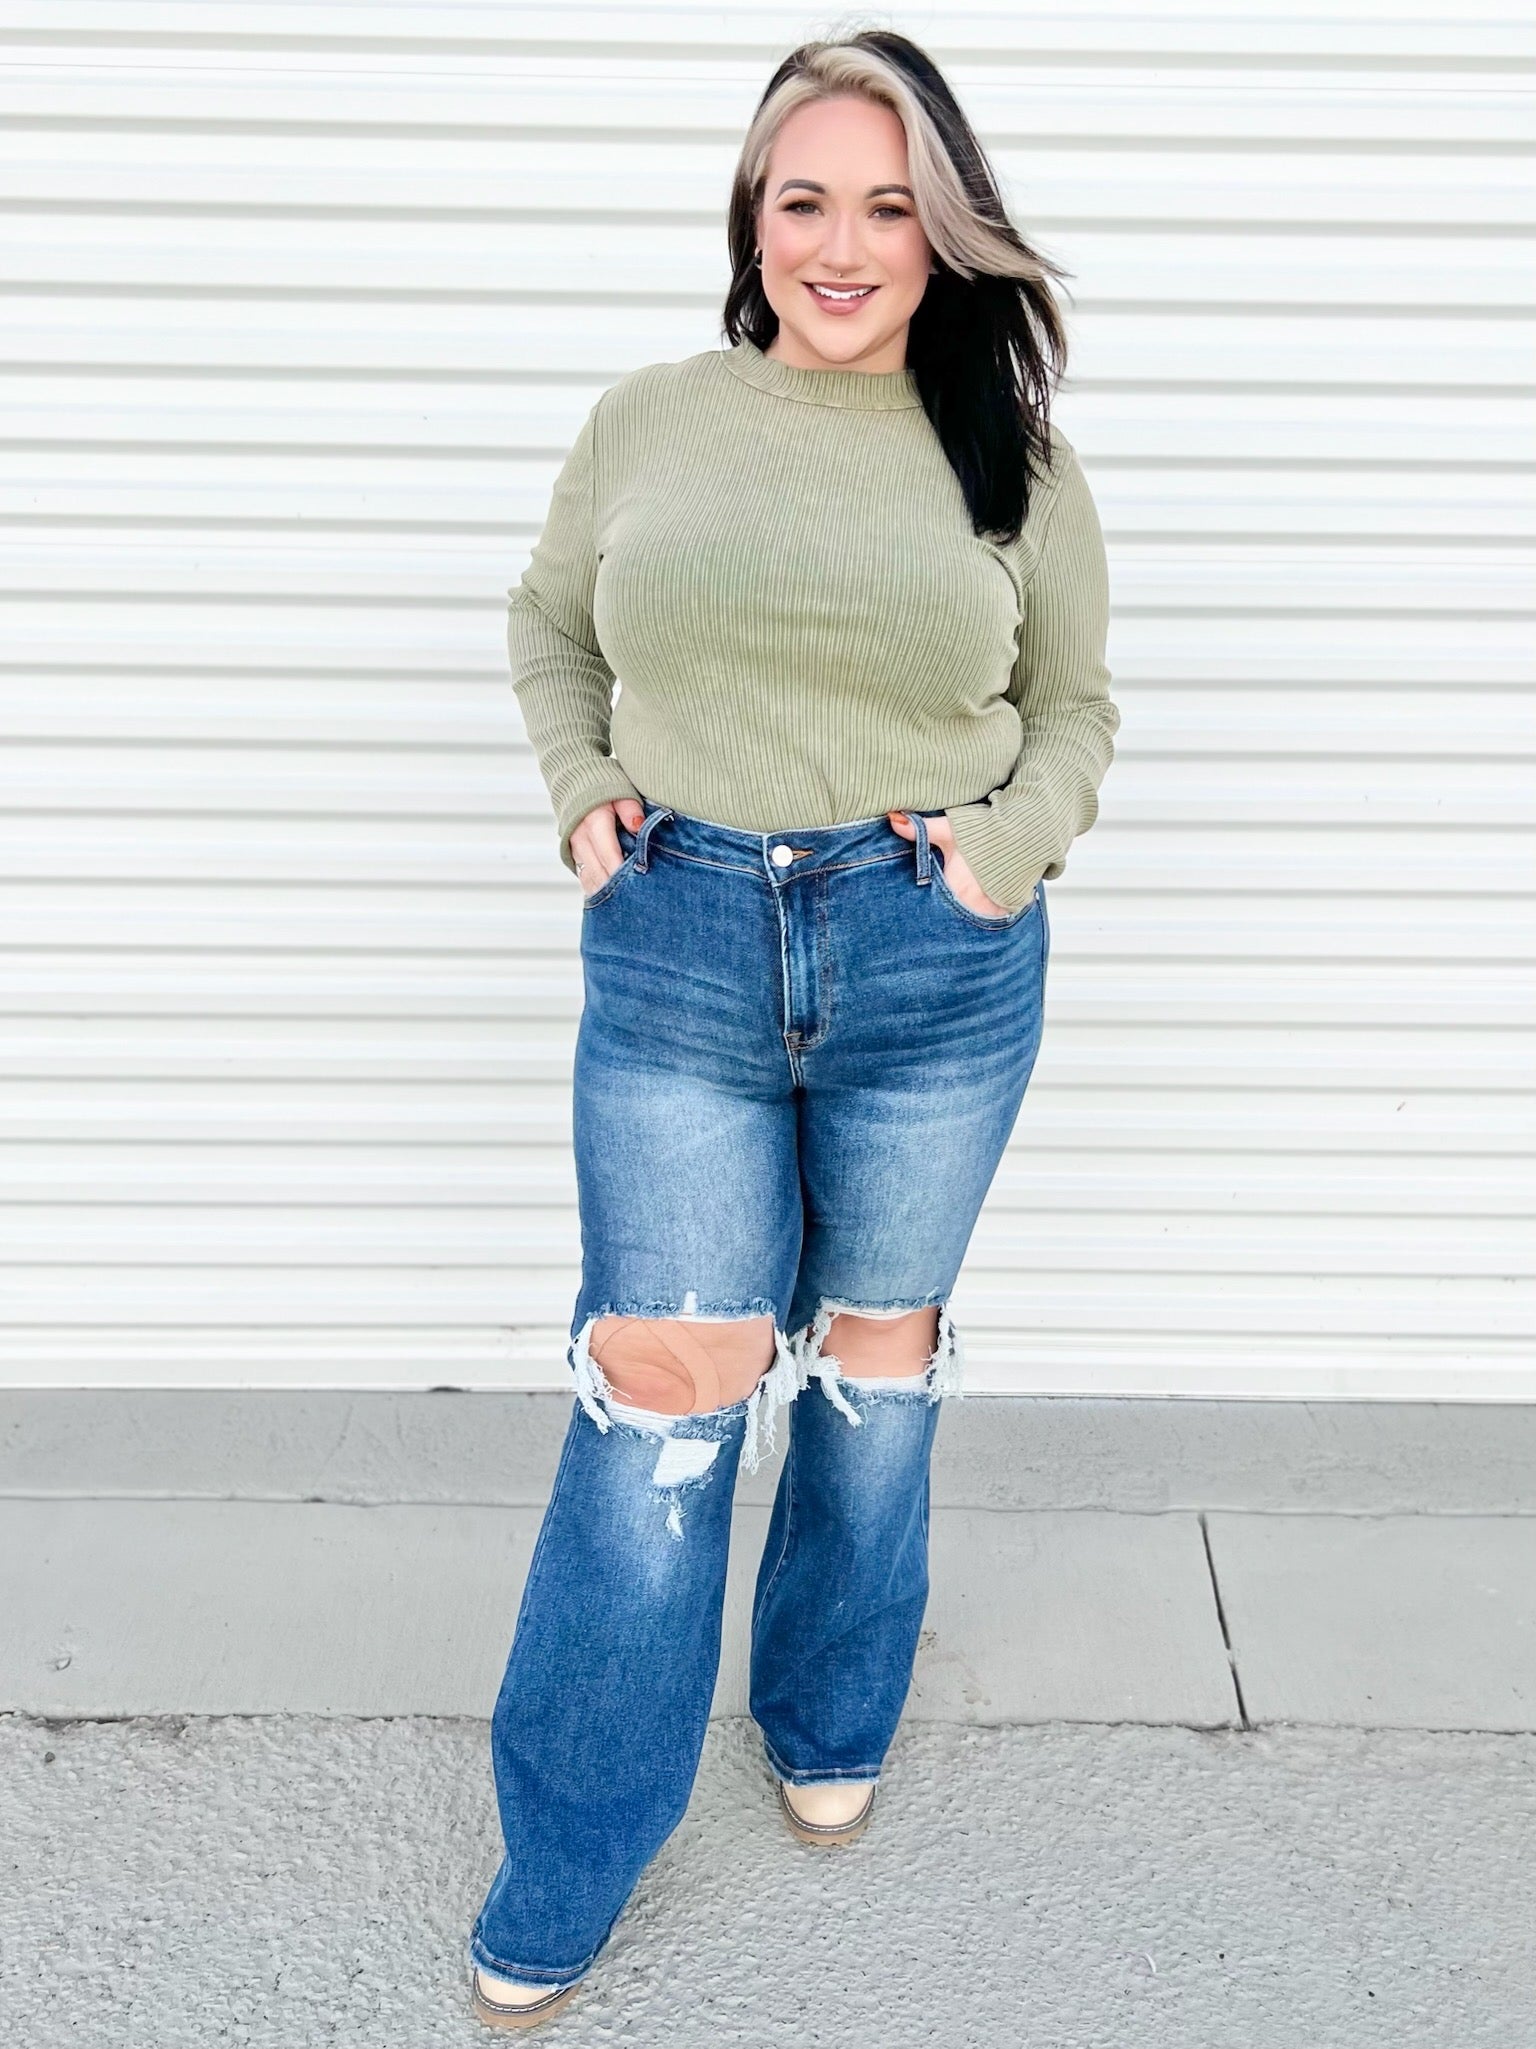 Popstar Status Flare Jeans by Risen Jeans-190 Jeans-Risen Jeans-Heathered Boho Boutique, Women's Fashion and Accessories in Palmetto, FL